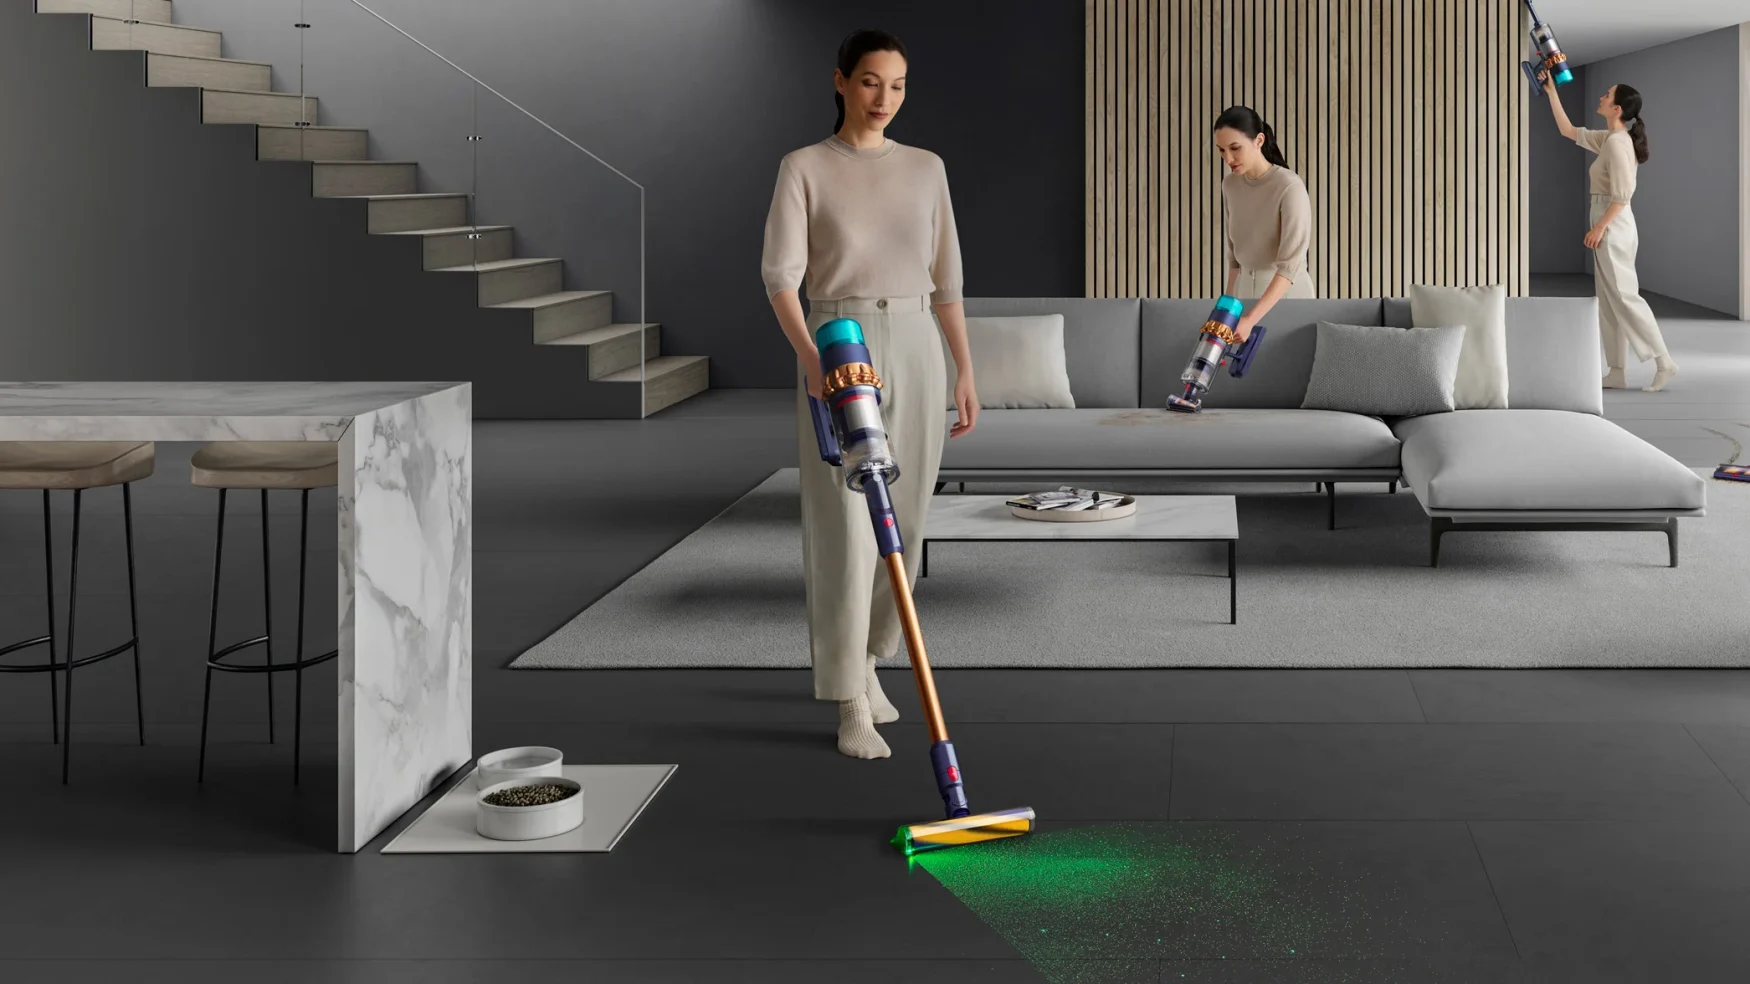 Dyson says its 360 Vis Nav has 'twice the suction' of any other robot vacuum